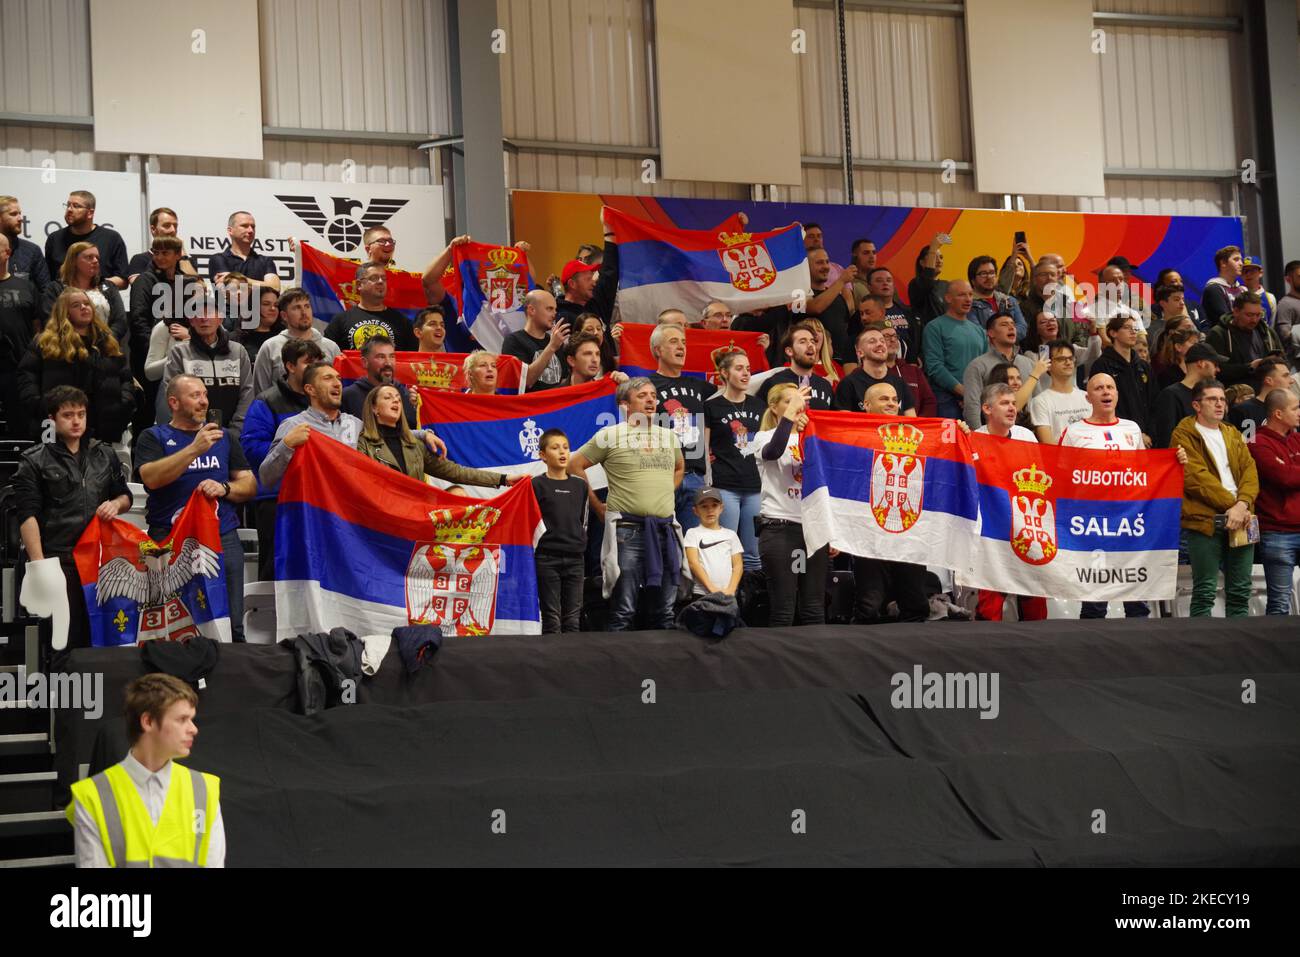 Newcastle upon Tyne, England, 11 November 2022. Supporters of Serbia during the playing of the national anthem before the Great Britain against Serbia match in the FIBA Basketball World Cup 2023 Qualifiers at the Vertu Motors Arena. Credit: Colin Edwards/Alamy Live News Stock Photo